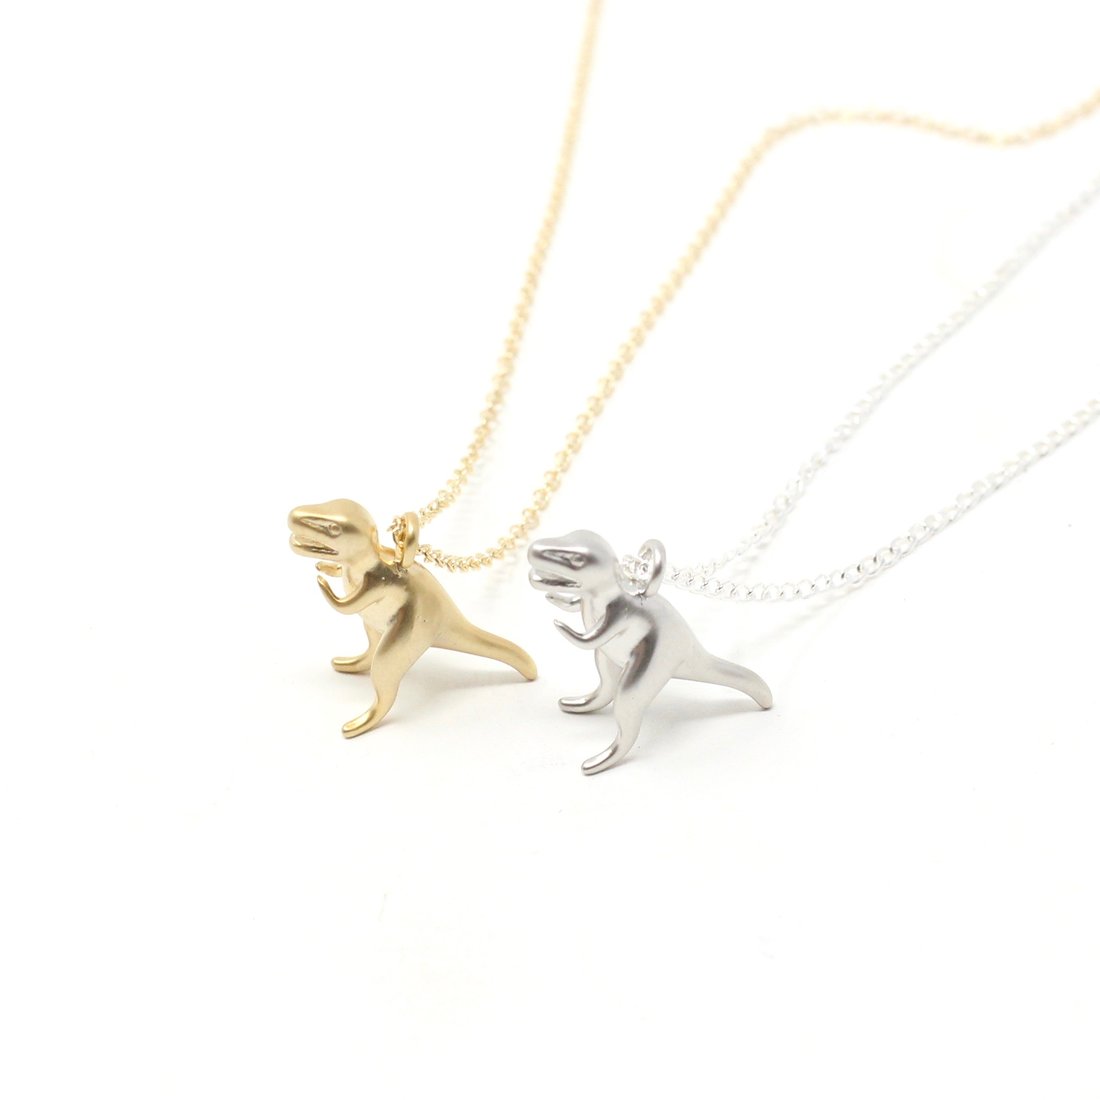 Dino Necklace by Crafts & Love